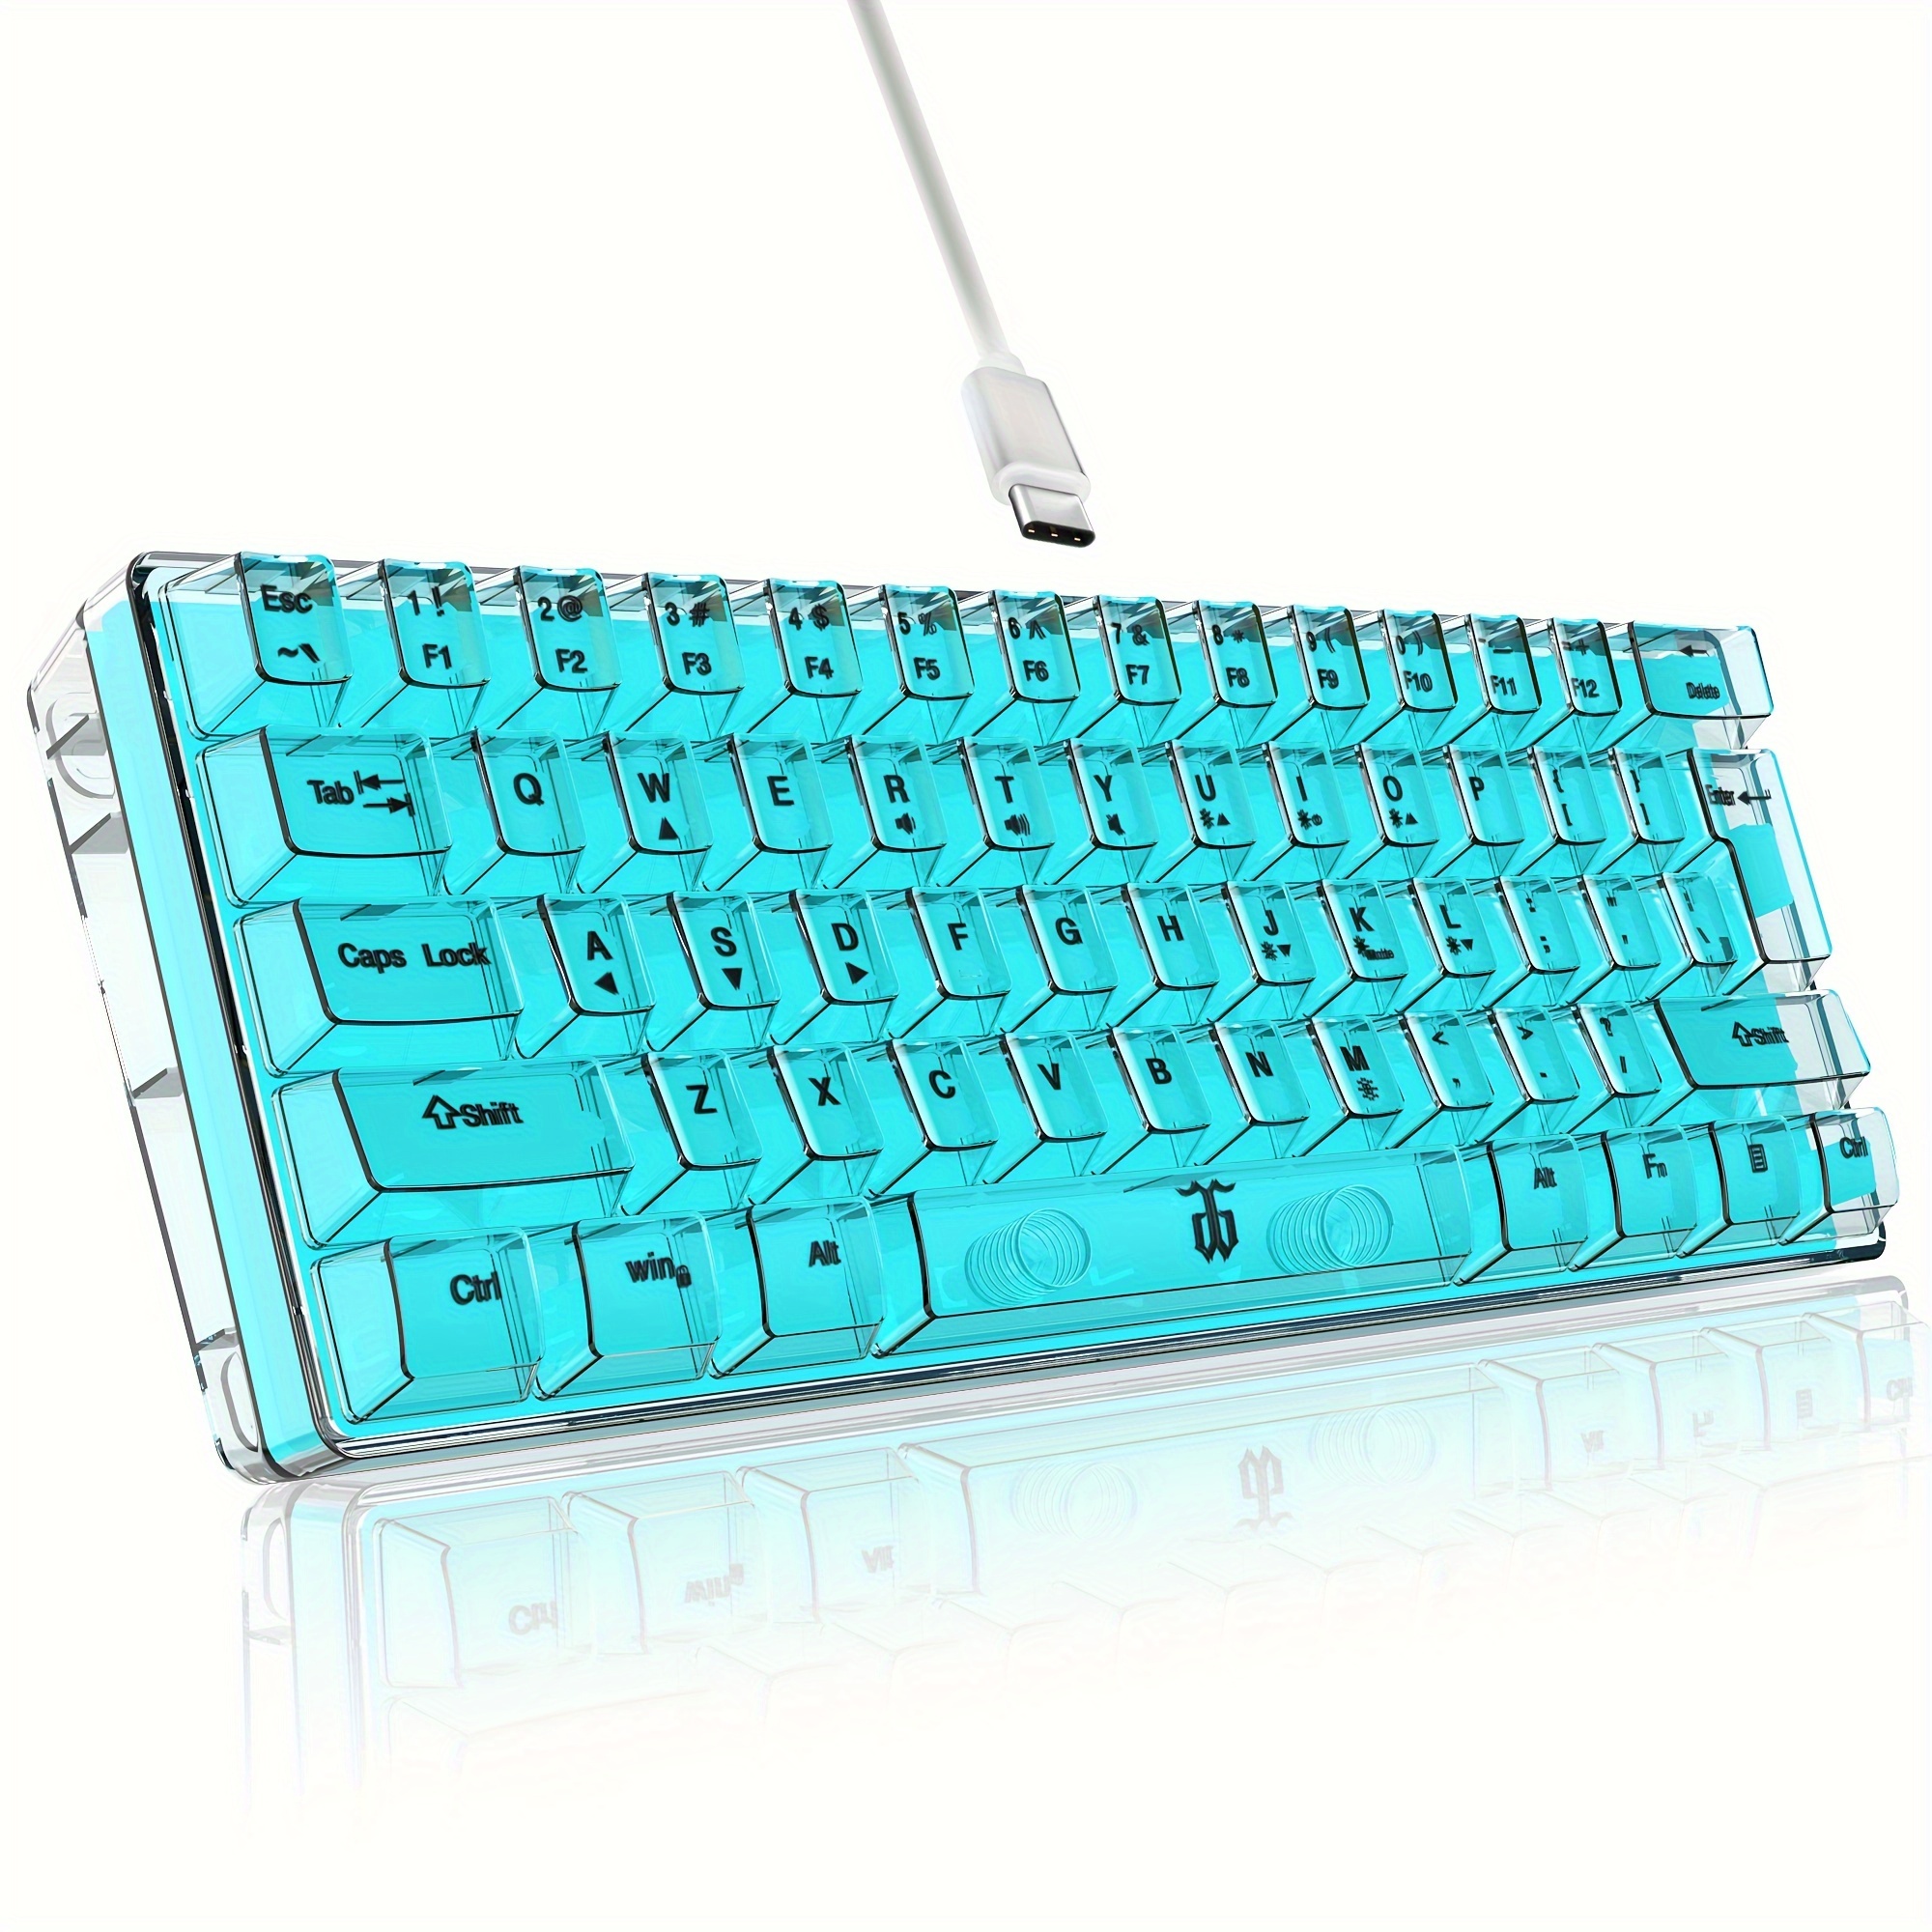 

60% Wired Gaming Keyboard, Rgb Backlight Ultra-compact Mini Keyboard, Small Transparent Keycaps, Suitable For Pc/ Gamers, White Transparent